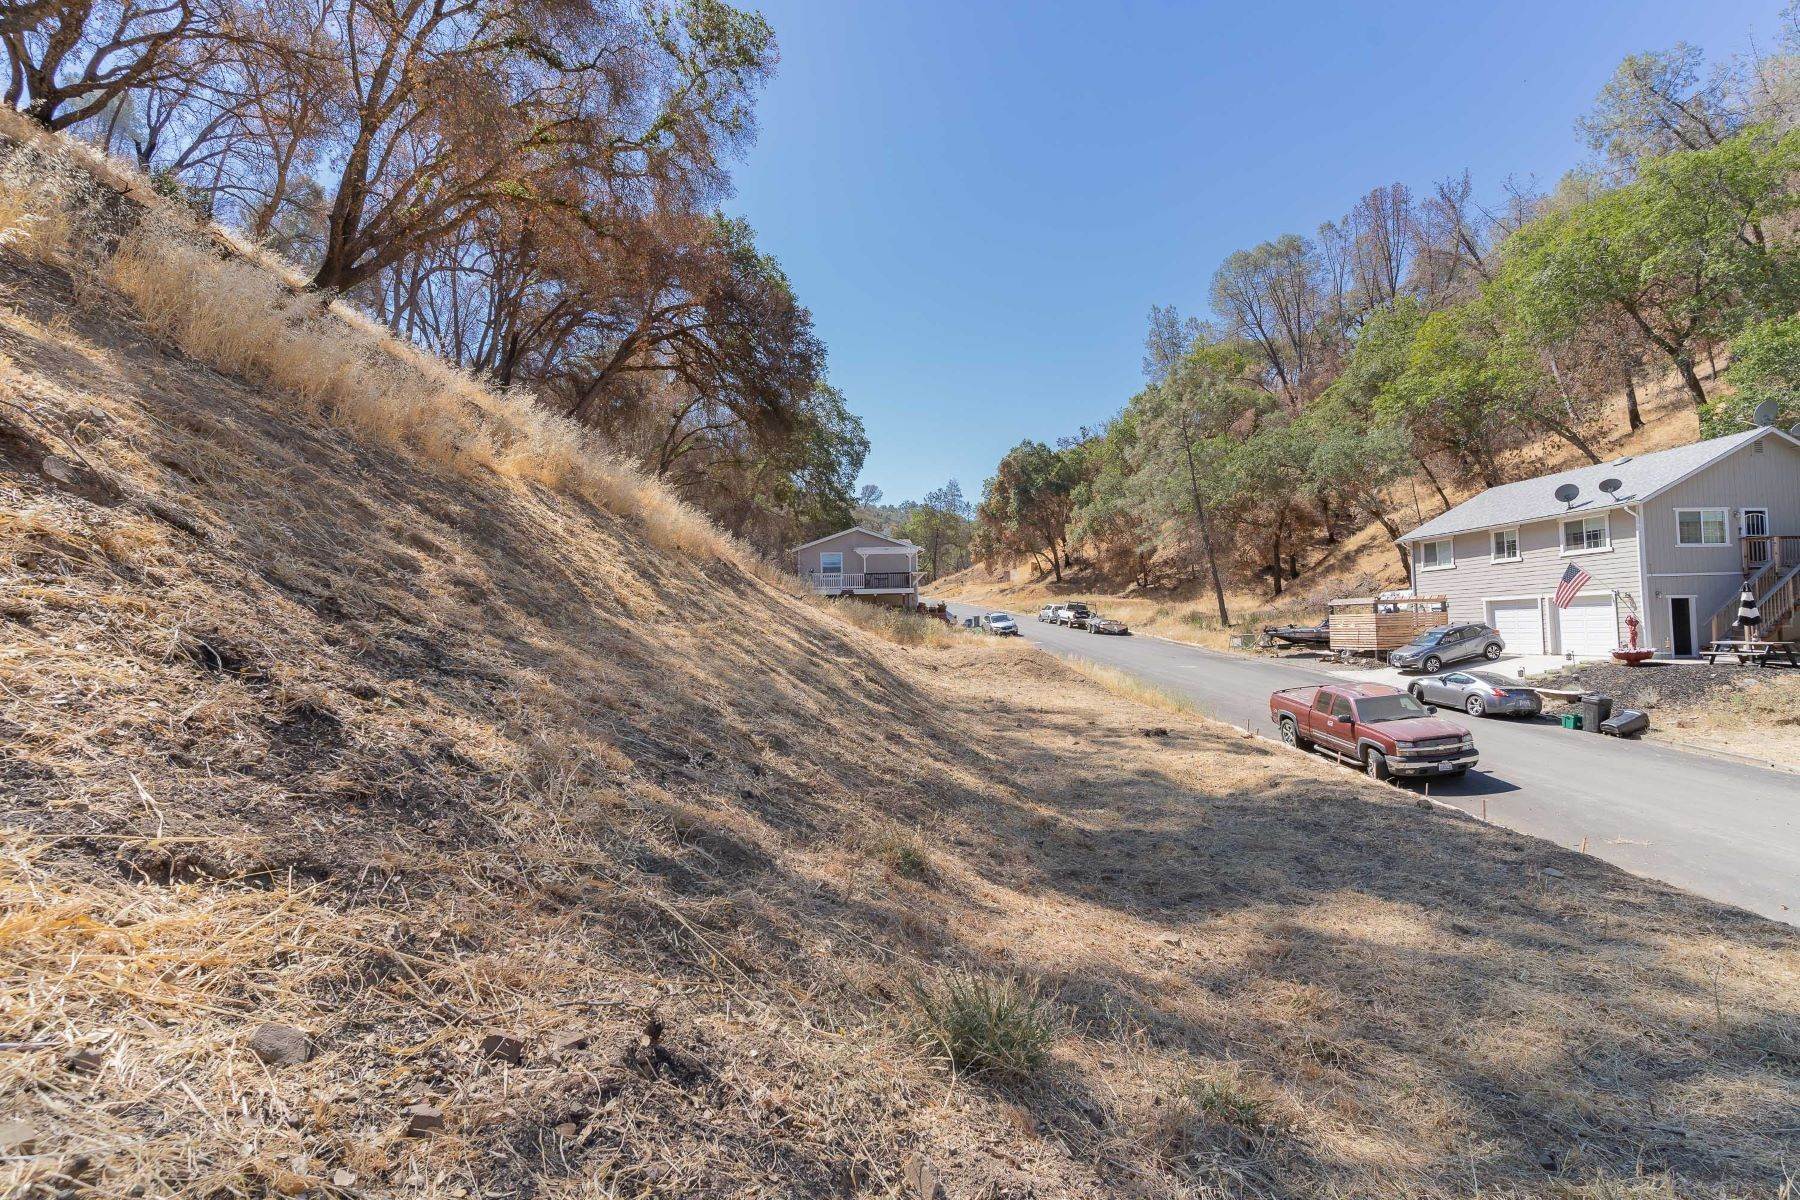 8. Land for Sale at Vacant lot 1074 Arroyo Grande Dr Napa, California 94558 United States